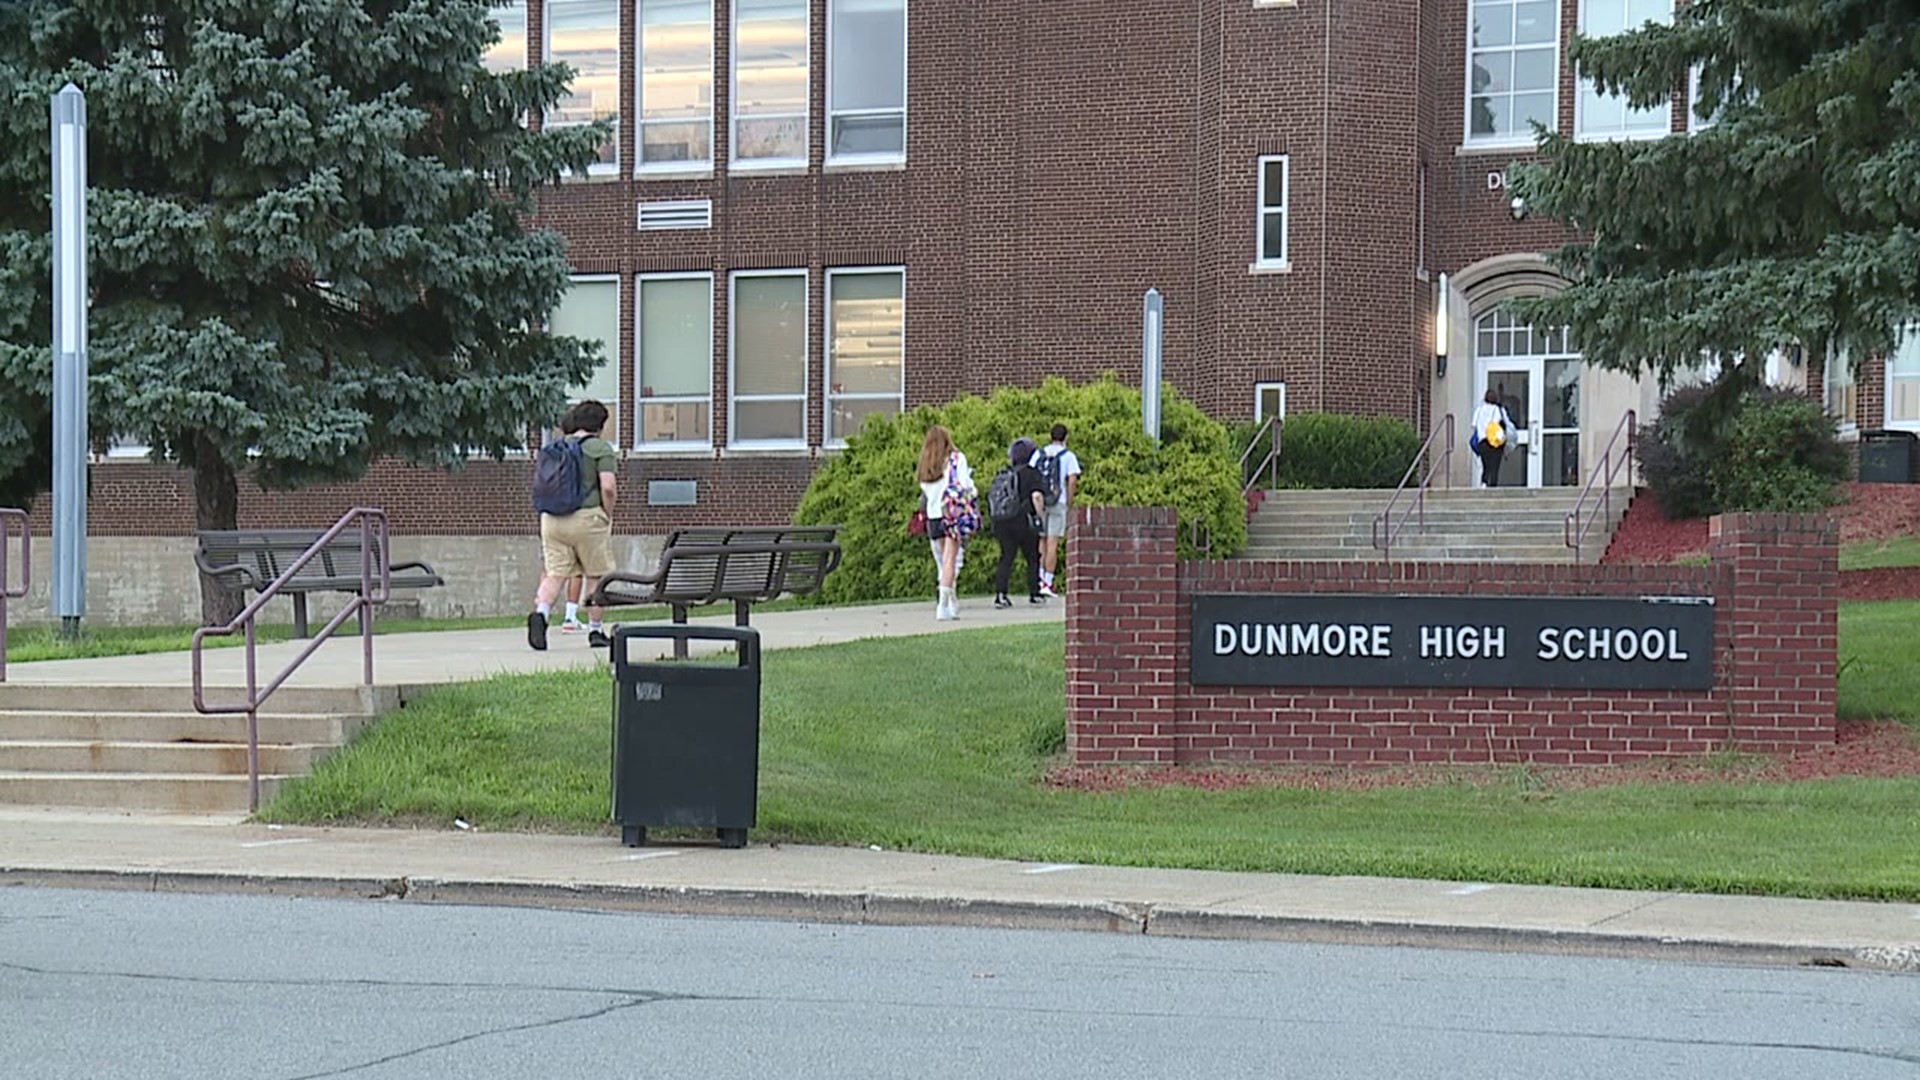 Dunmore police were tipped off after a concerned parent reported finding disturbing text messages on her child's phone in September of 2021.